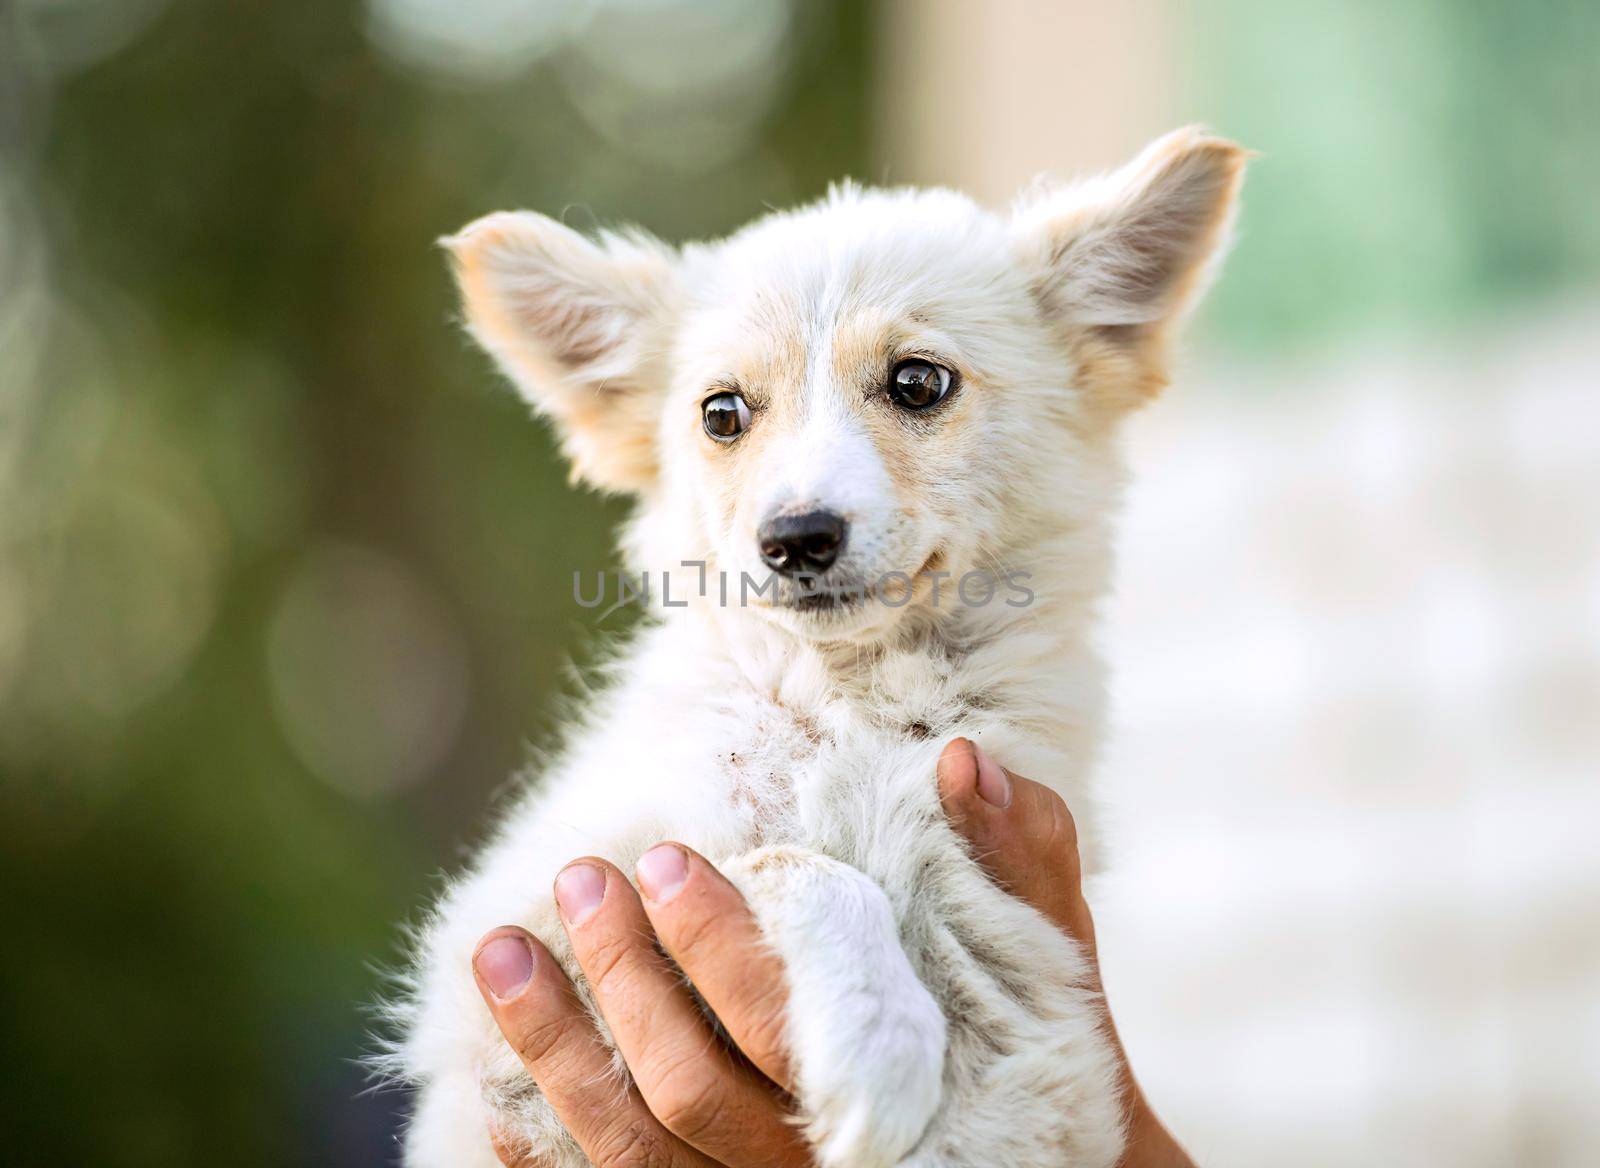 mongrel puppy is sitting on the hands of his owner